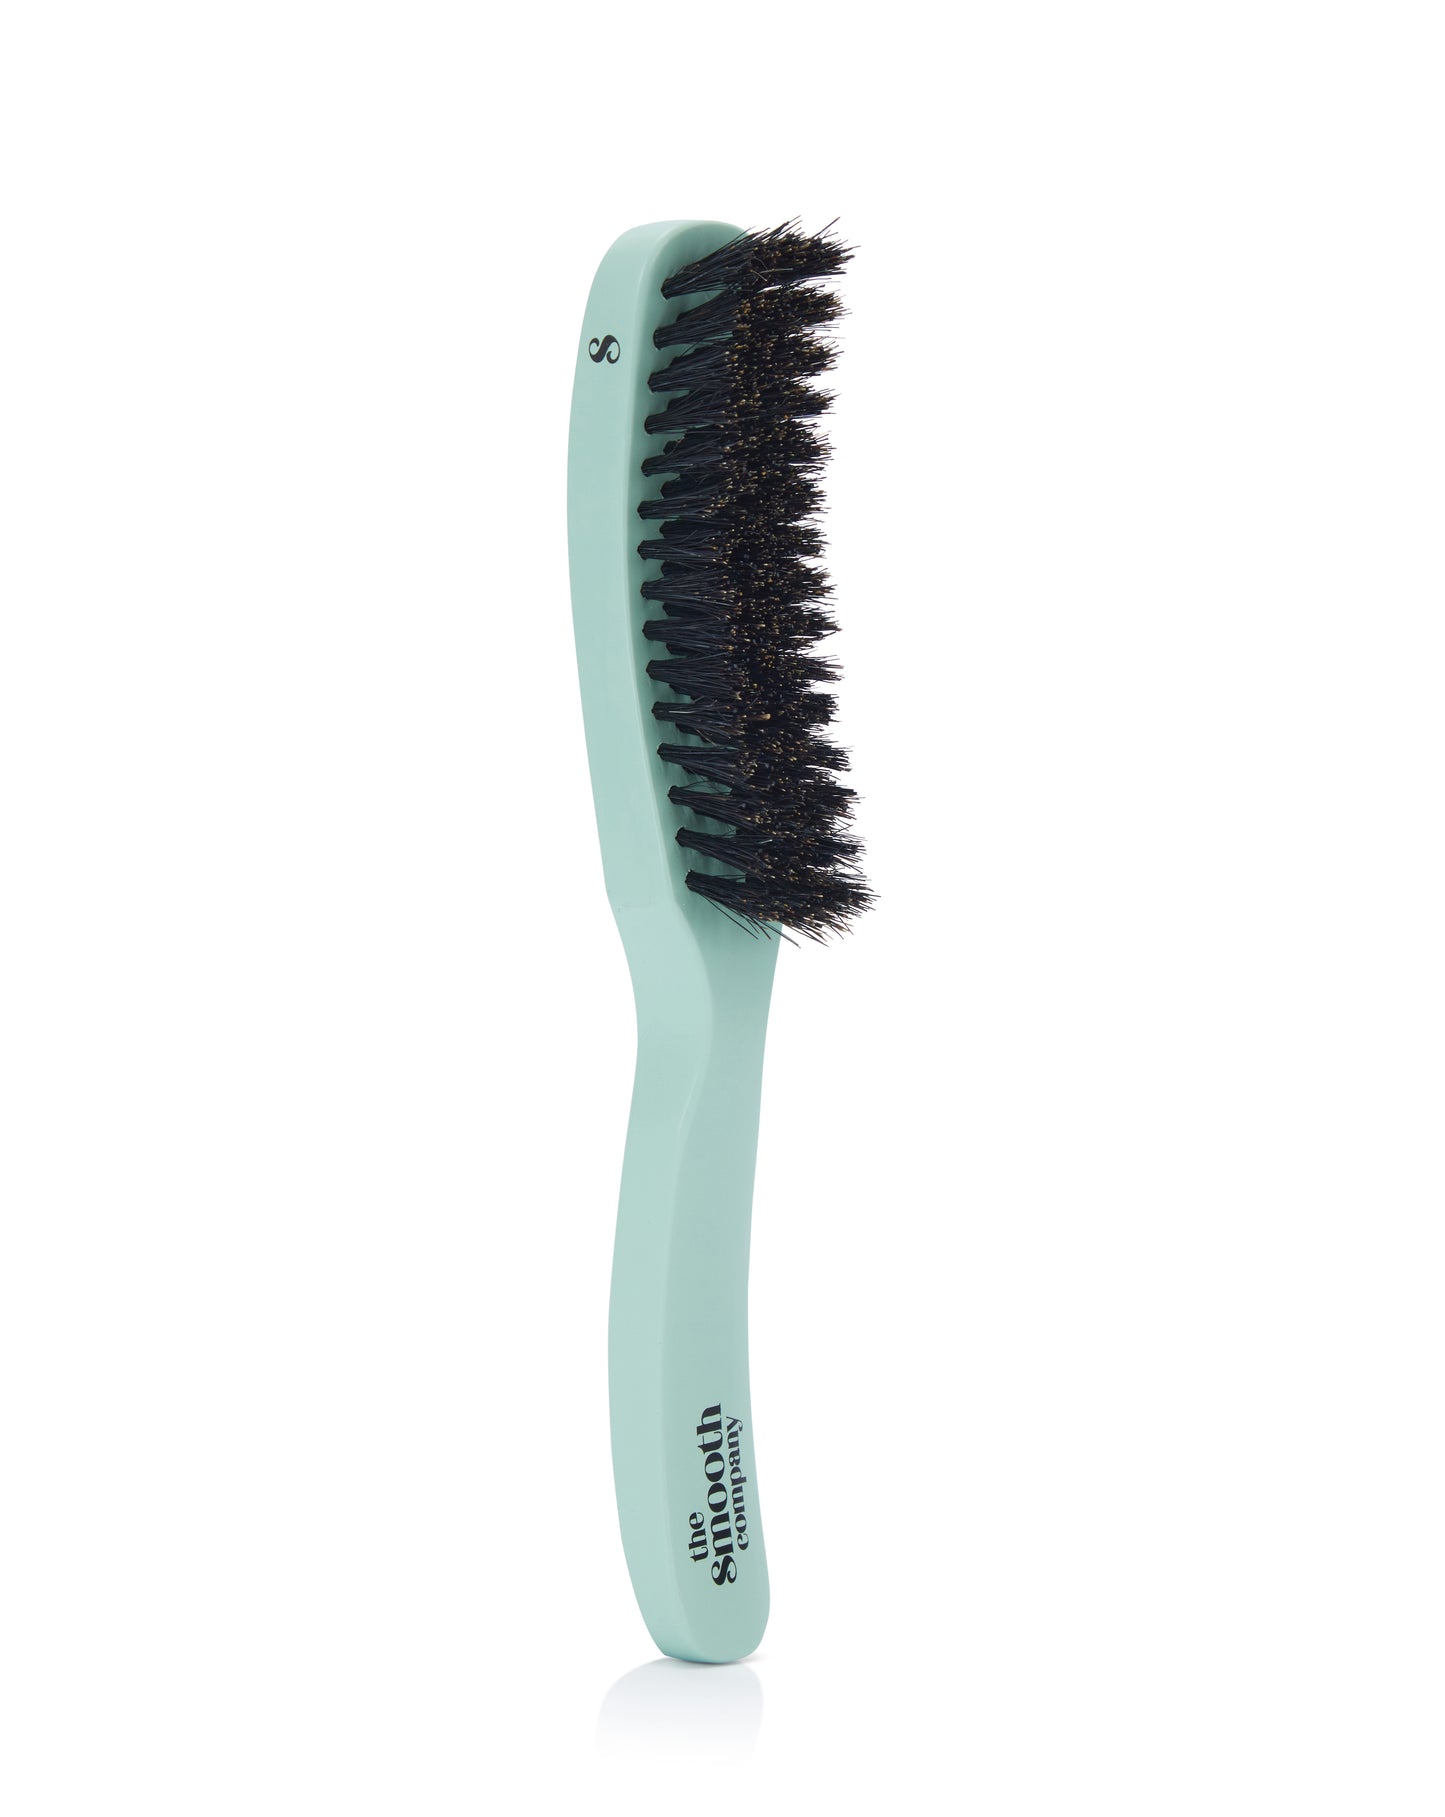 Mane Master™ Curved Smoothing Hair Brush – TheSmoothCompany